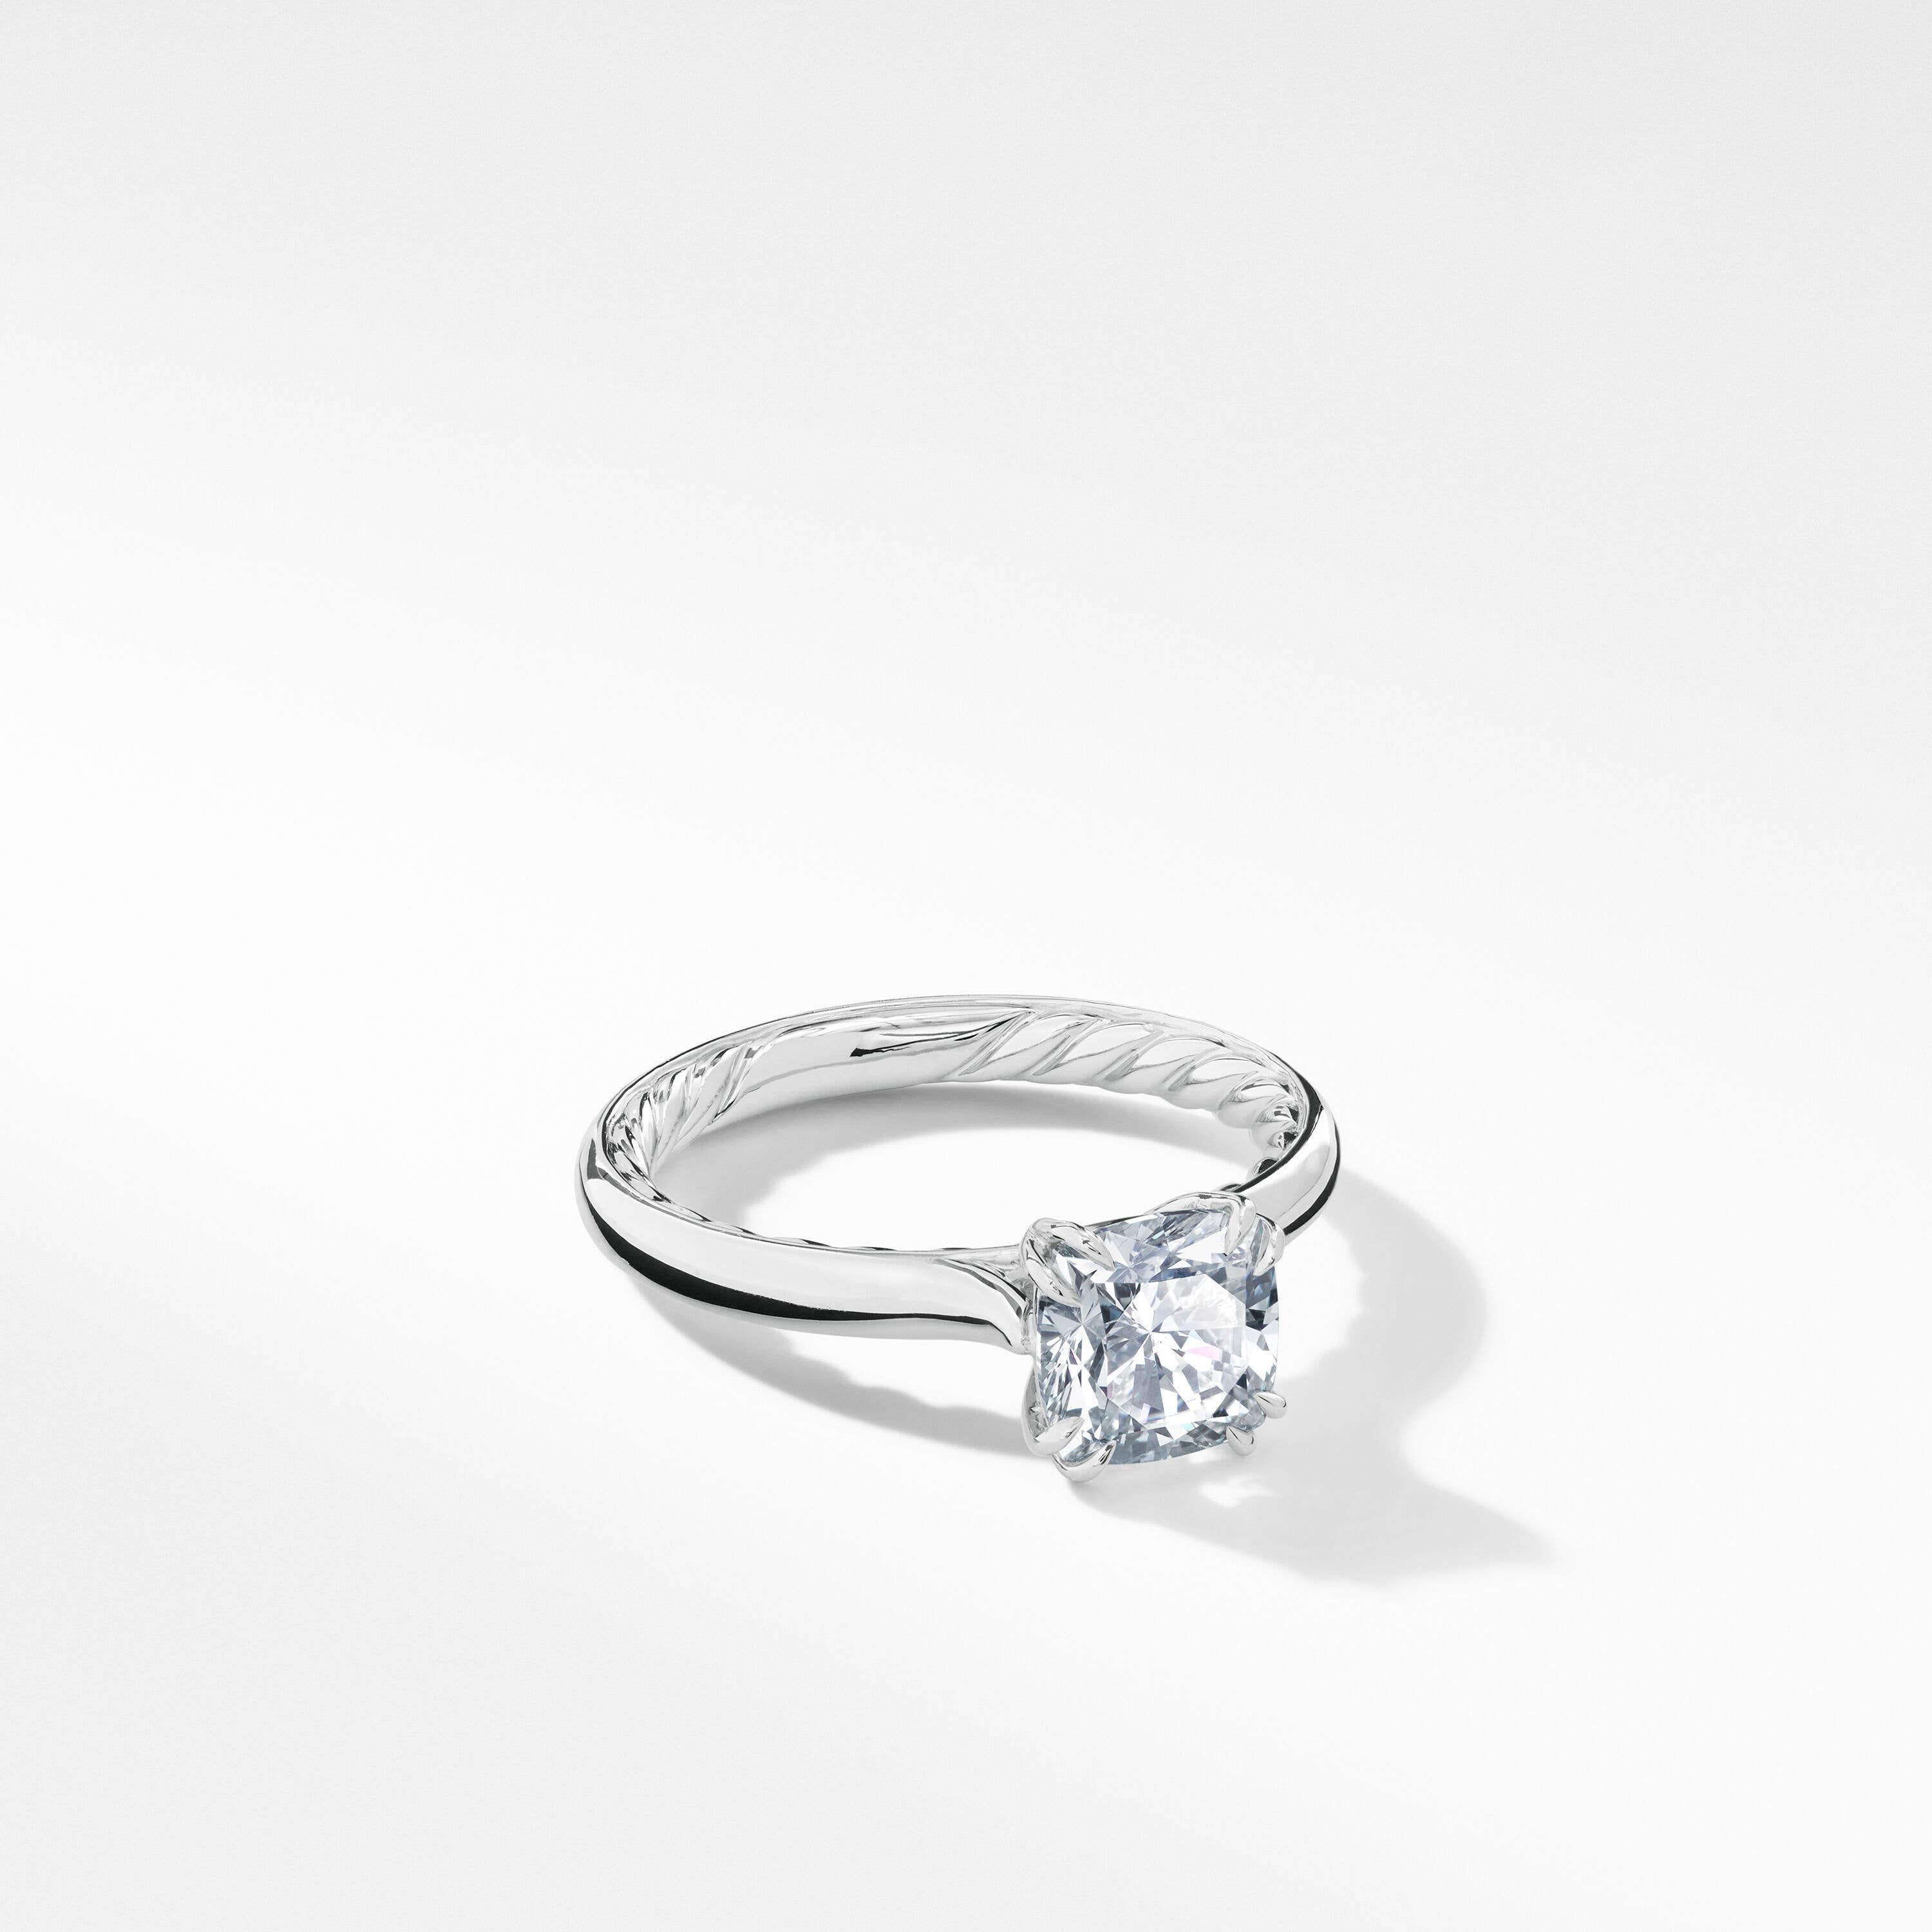 DY Eden Engagement Ring in Platinum, Cushion